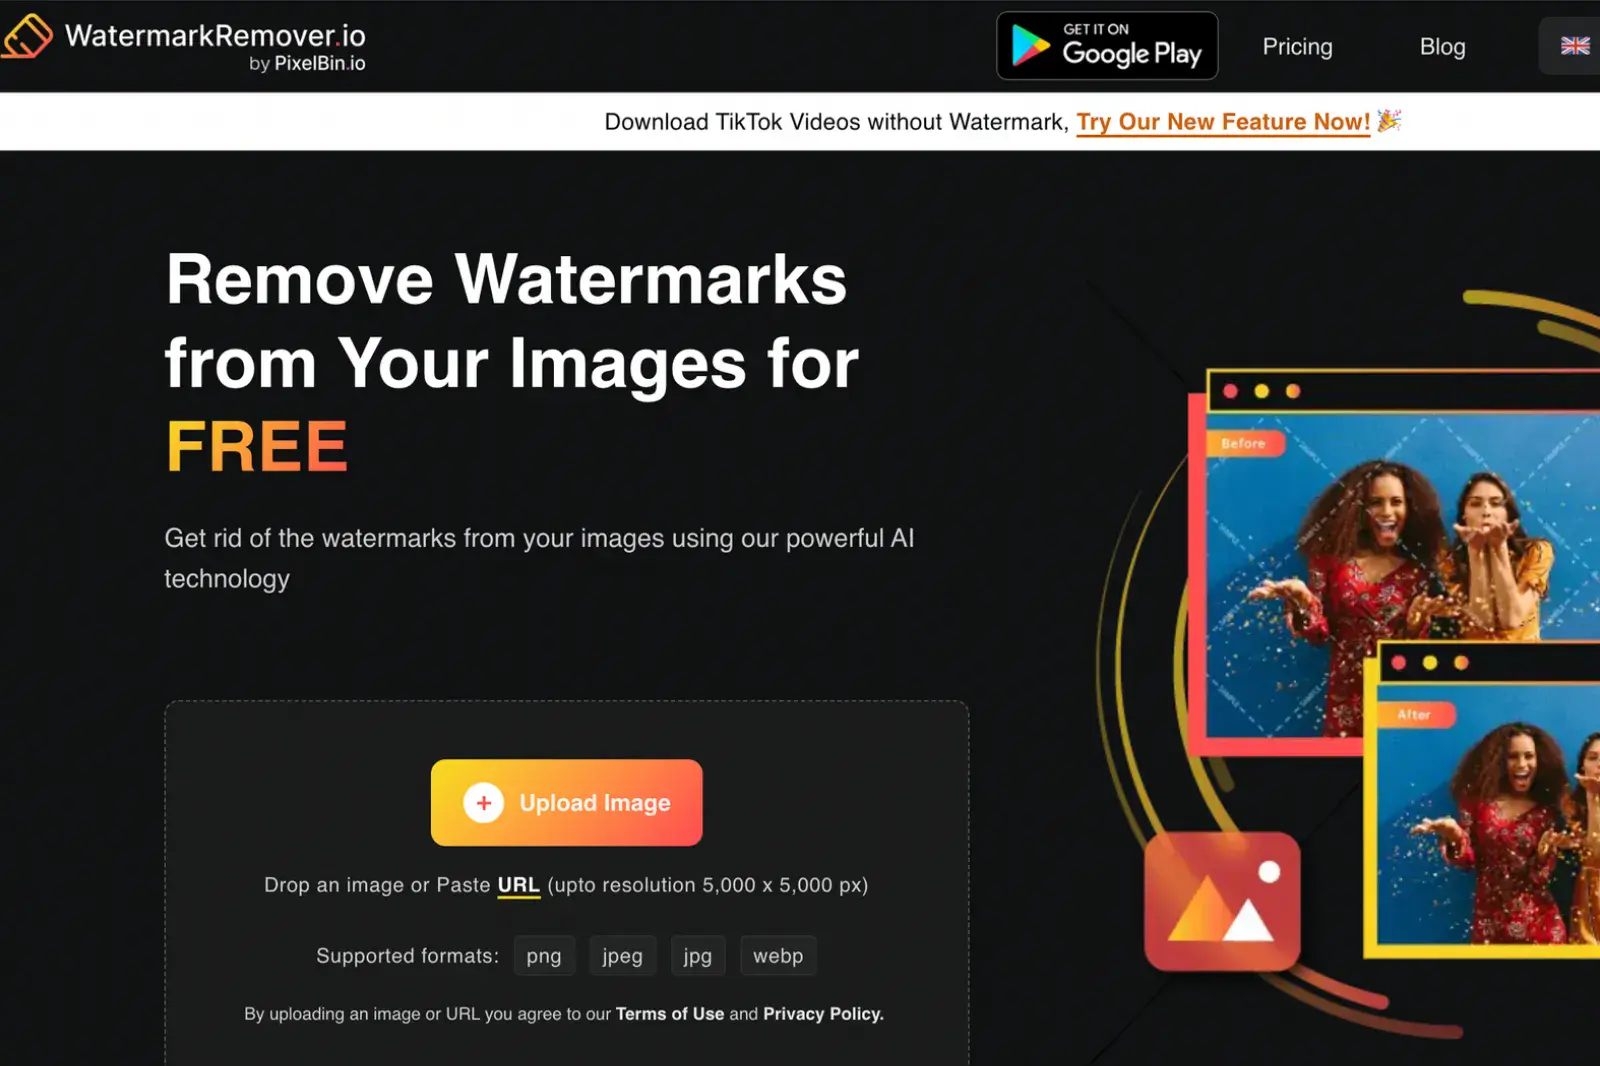 Home Page of WatermarkRemover.io